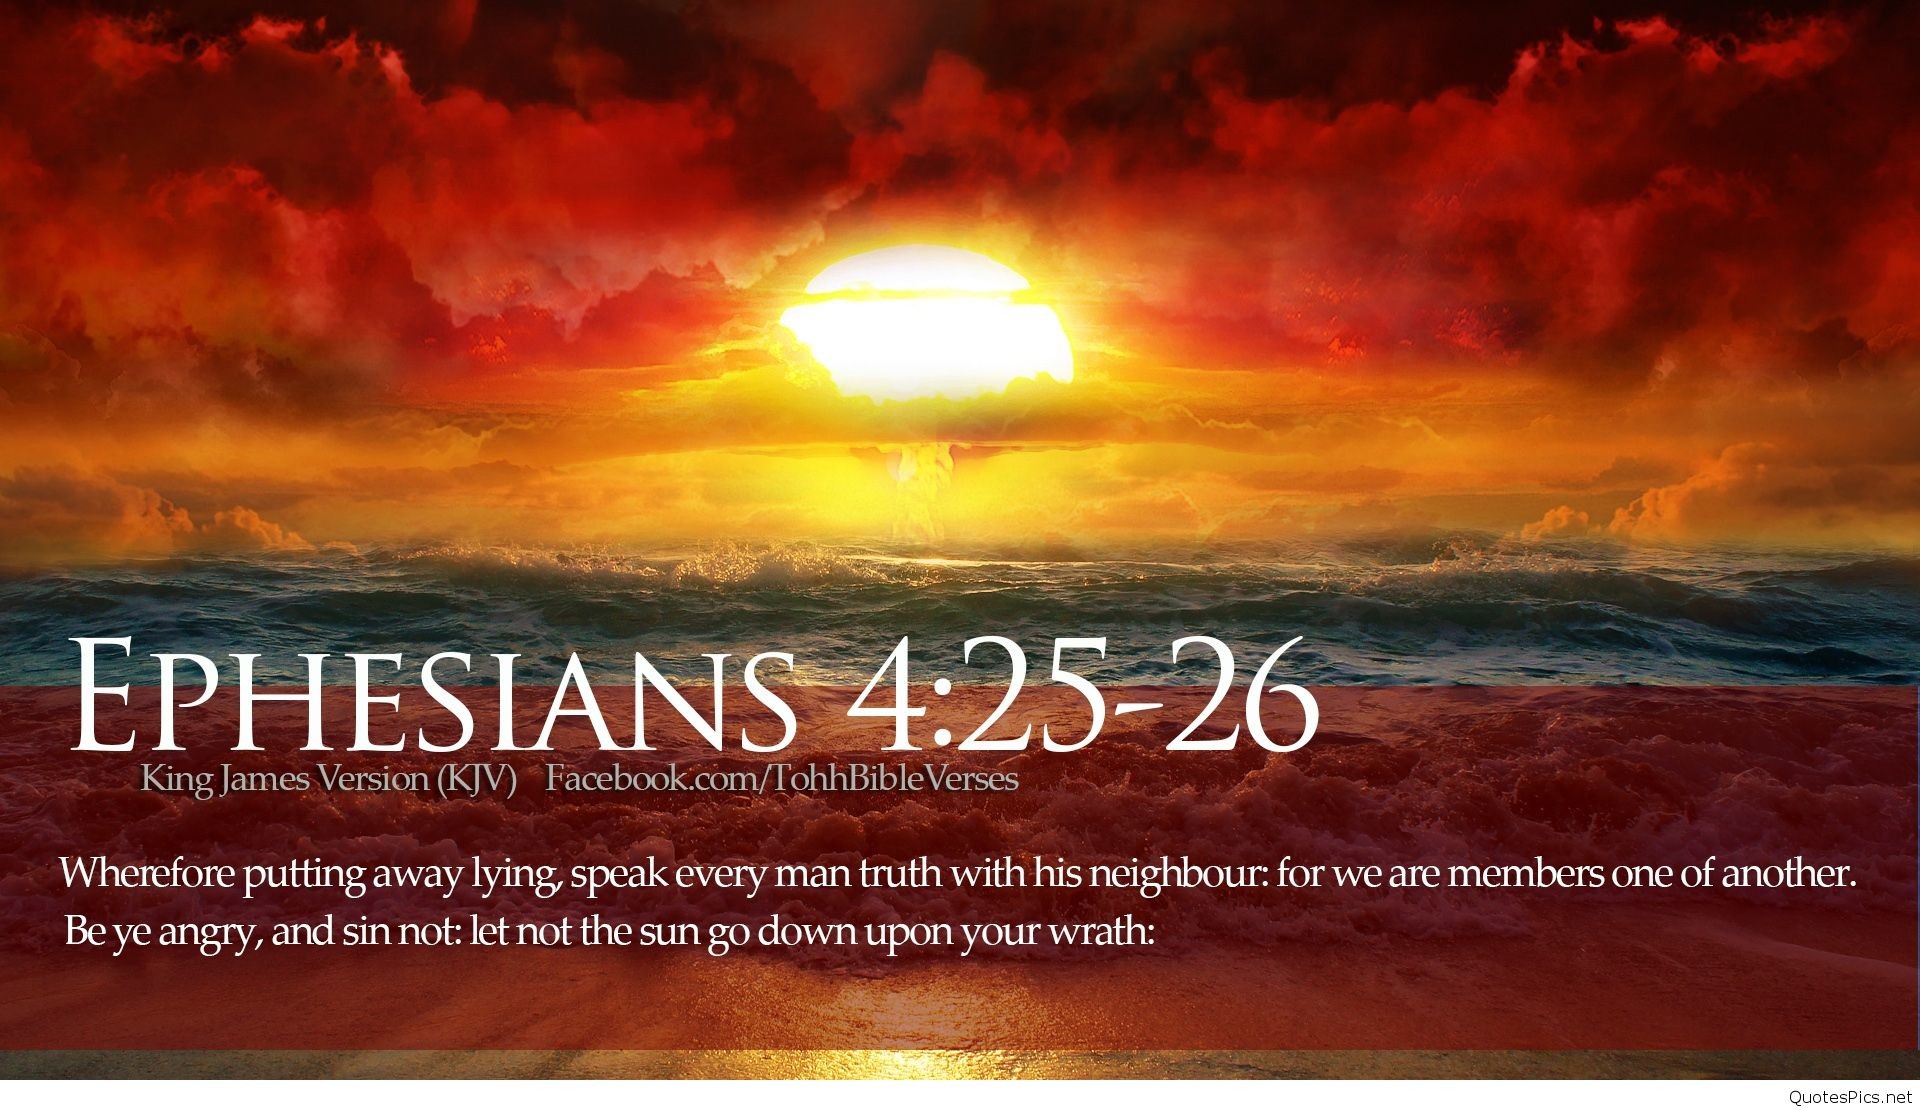 Bibleverses religion quote text poster bible verses e